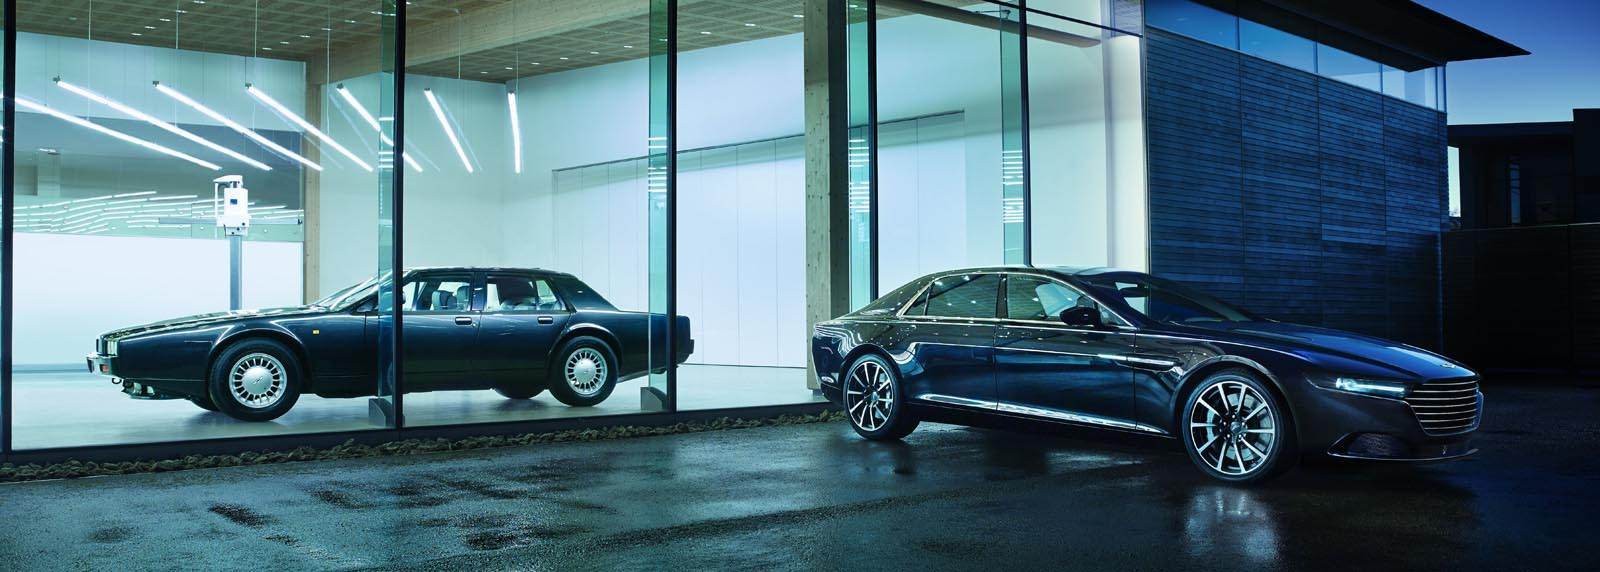 aston-masrtin-releases-lagonda-super-saloon-due-to-unprecedented-demand-from-the-middle-east1